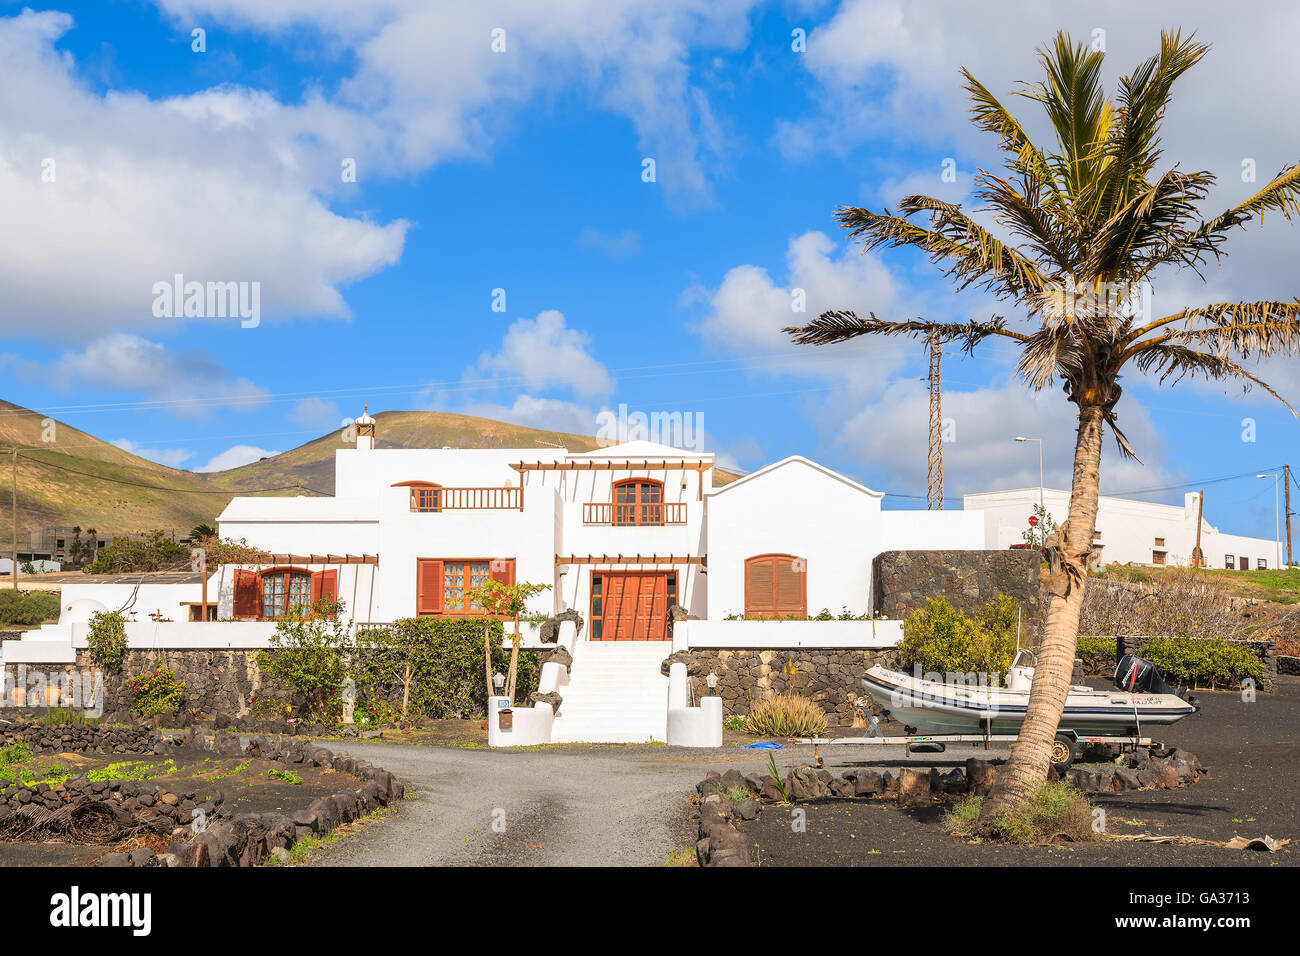 LANZAROTE ISLAND, SPAIN - JAN 17, 2015: typical Canarian house in tropical landscape of Lanzarote island, Spain. Many Europeans buy properties on Canary Islands due to sunny and warm climate. Stock Photo